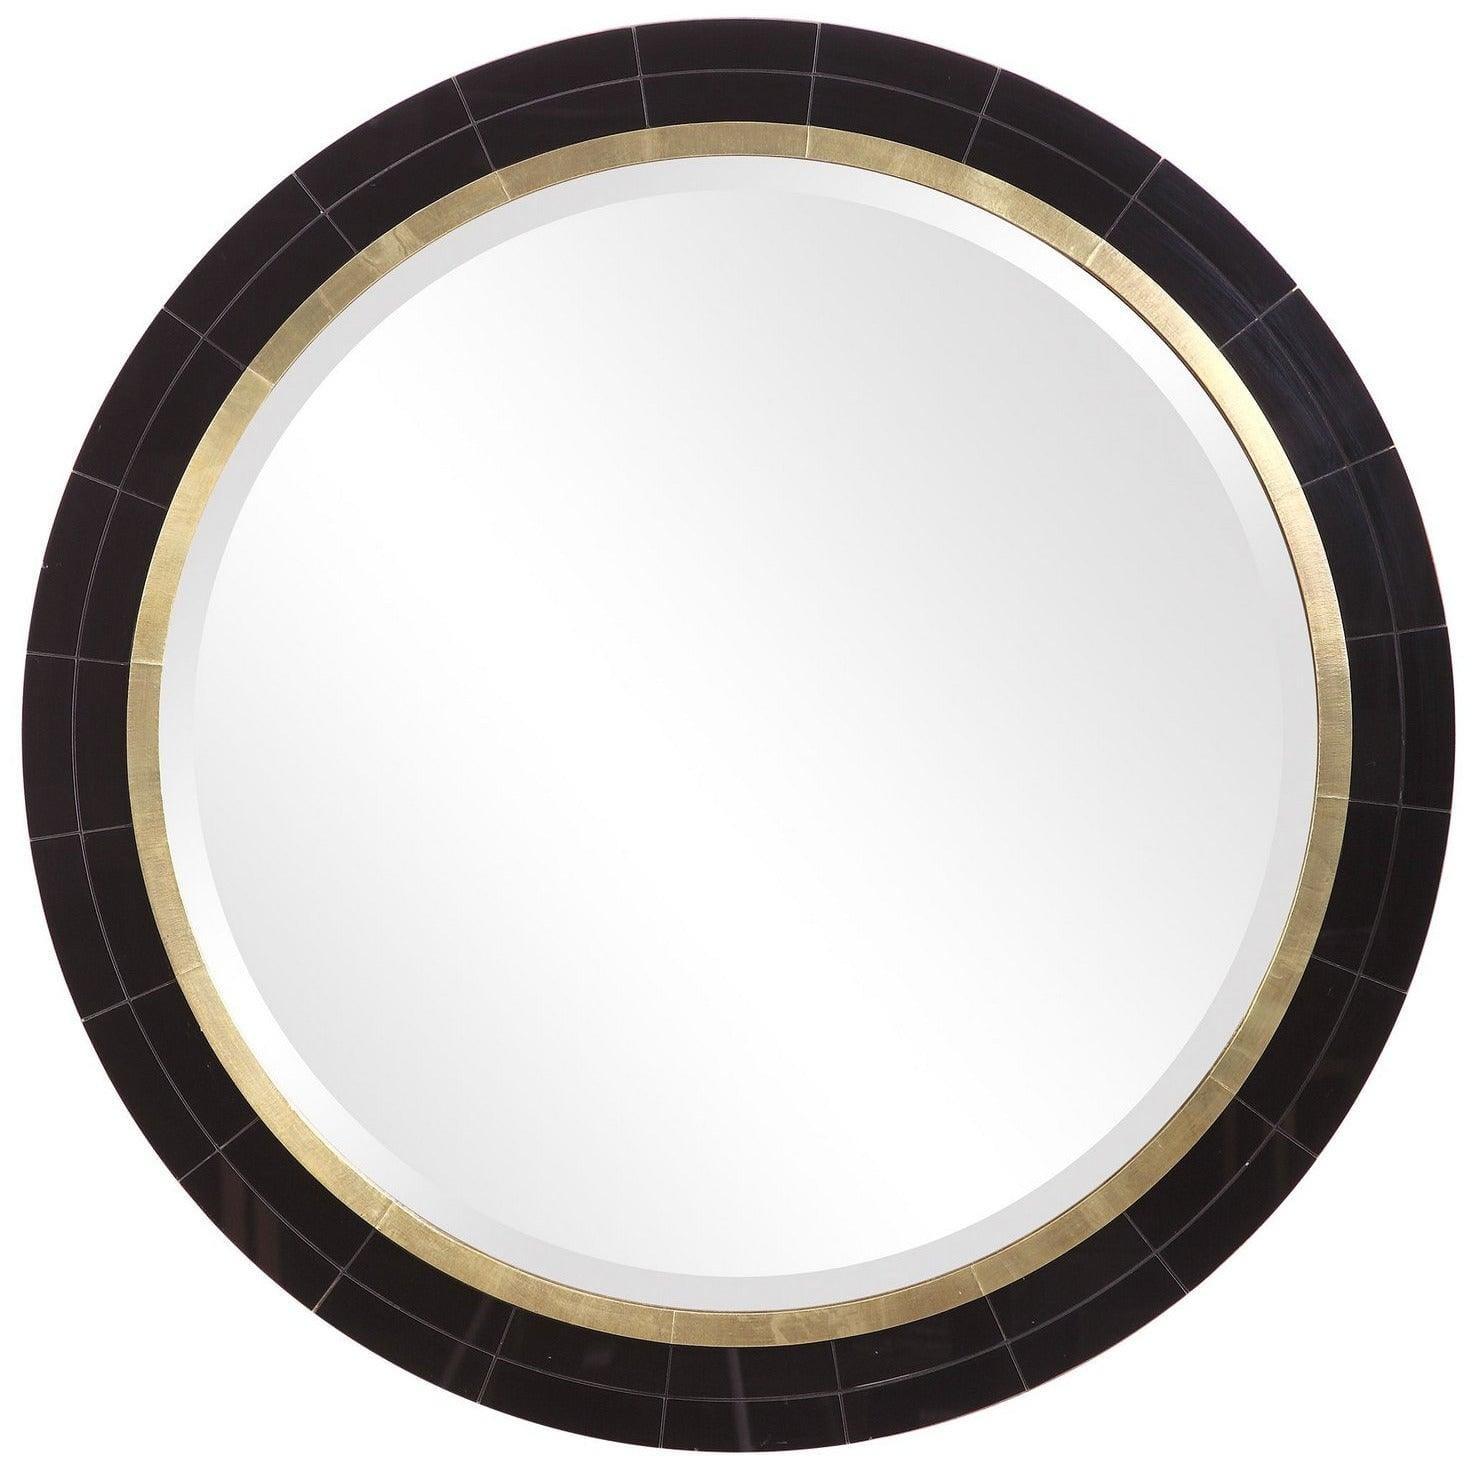 The Uttermost - Nayla Mirror - 09633 | Montreal Lighting & Hardware